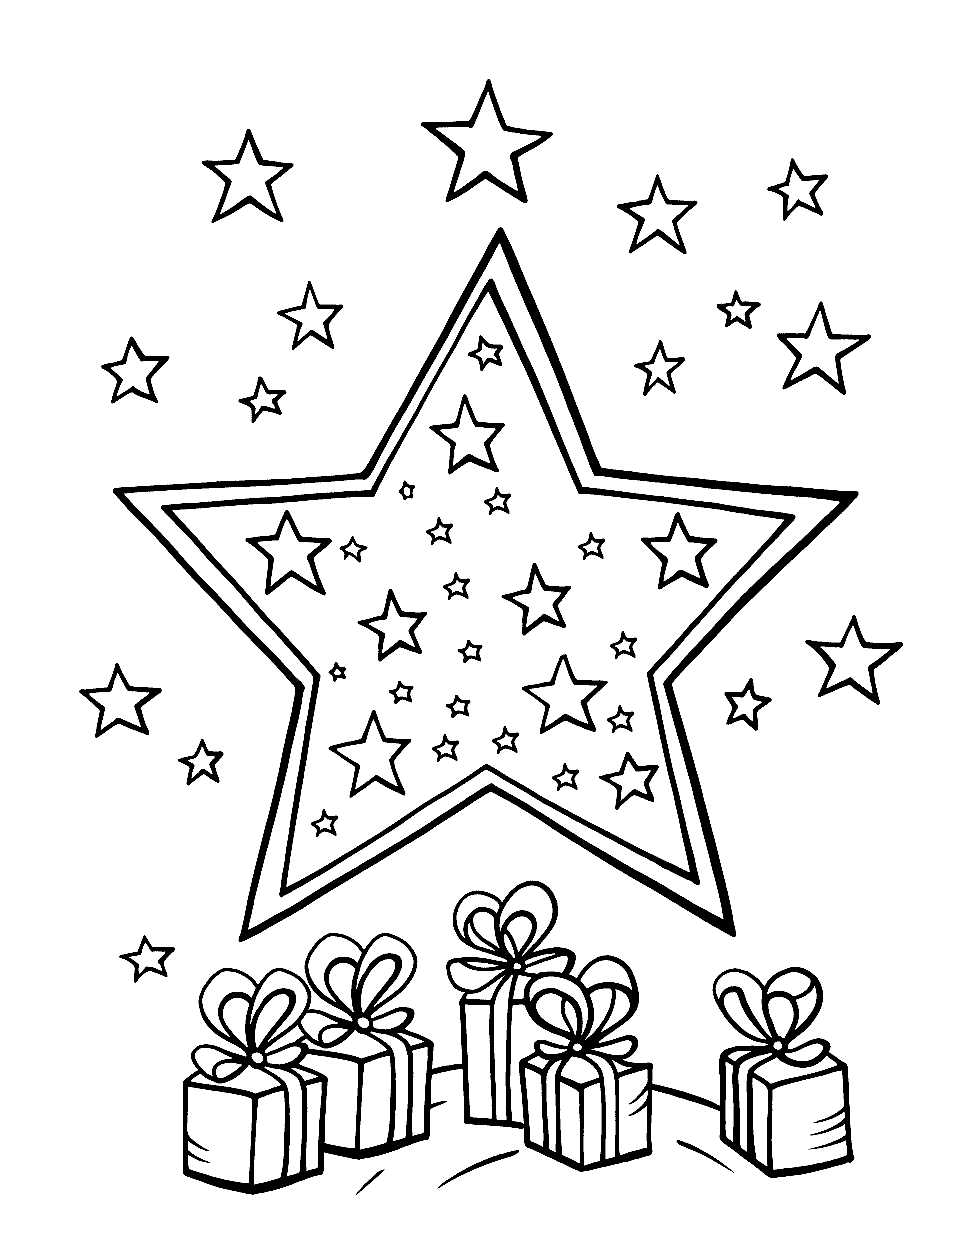 Christmas Star Scene Coloring Page - A bright large star surrounded by Christmas gifts.